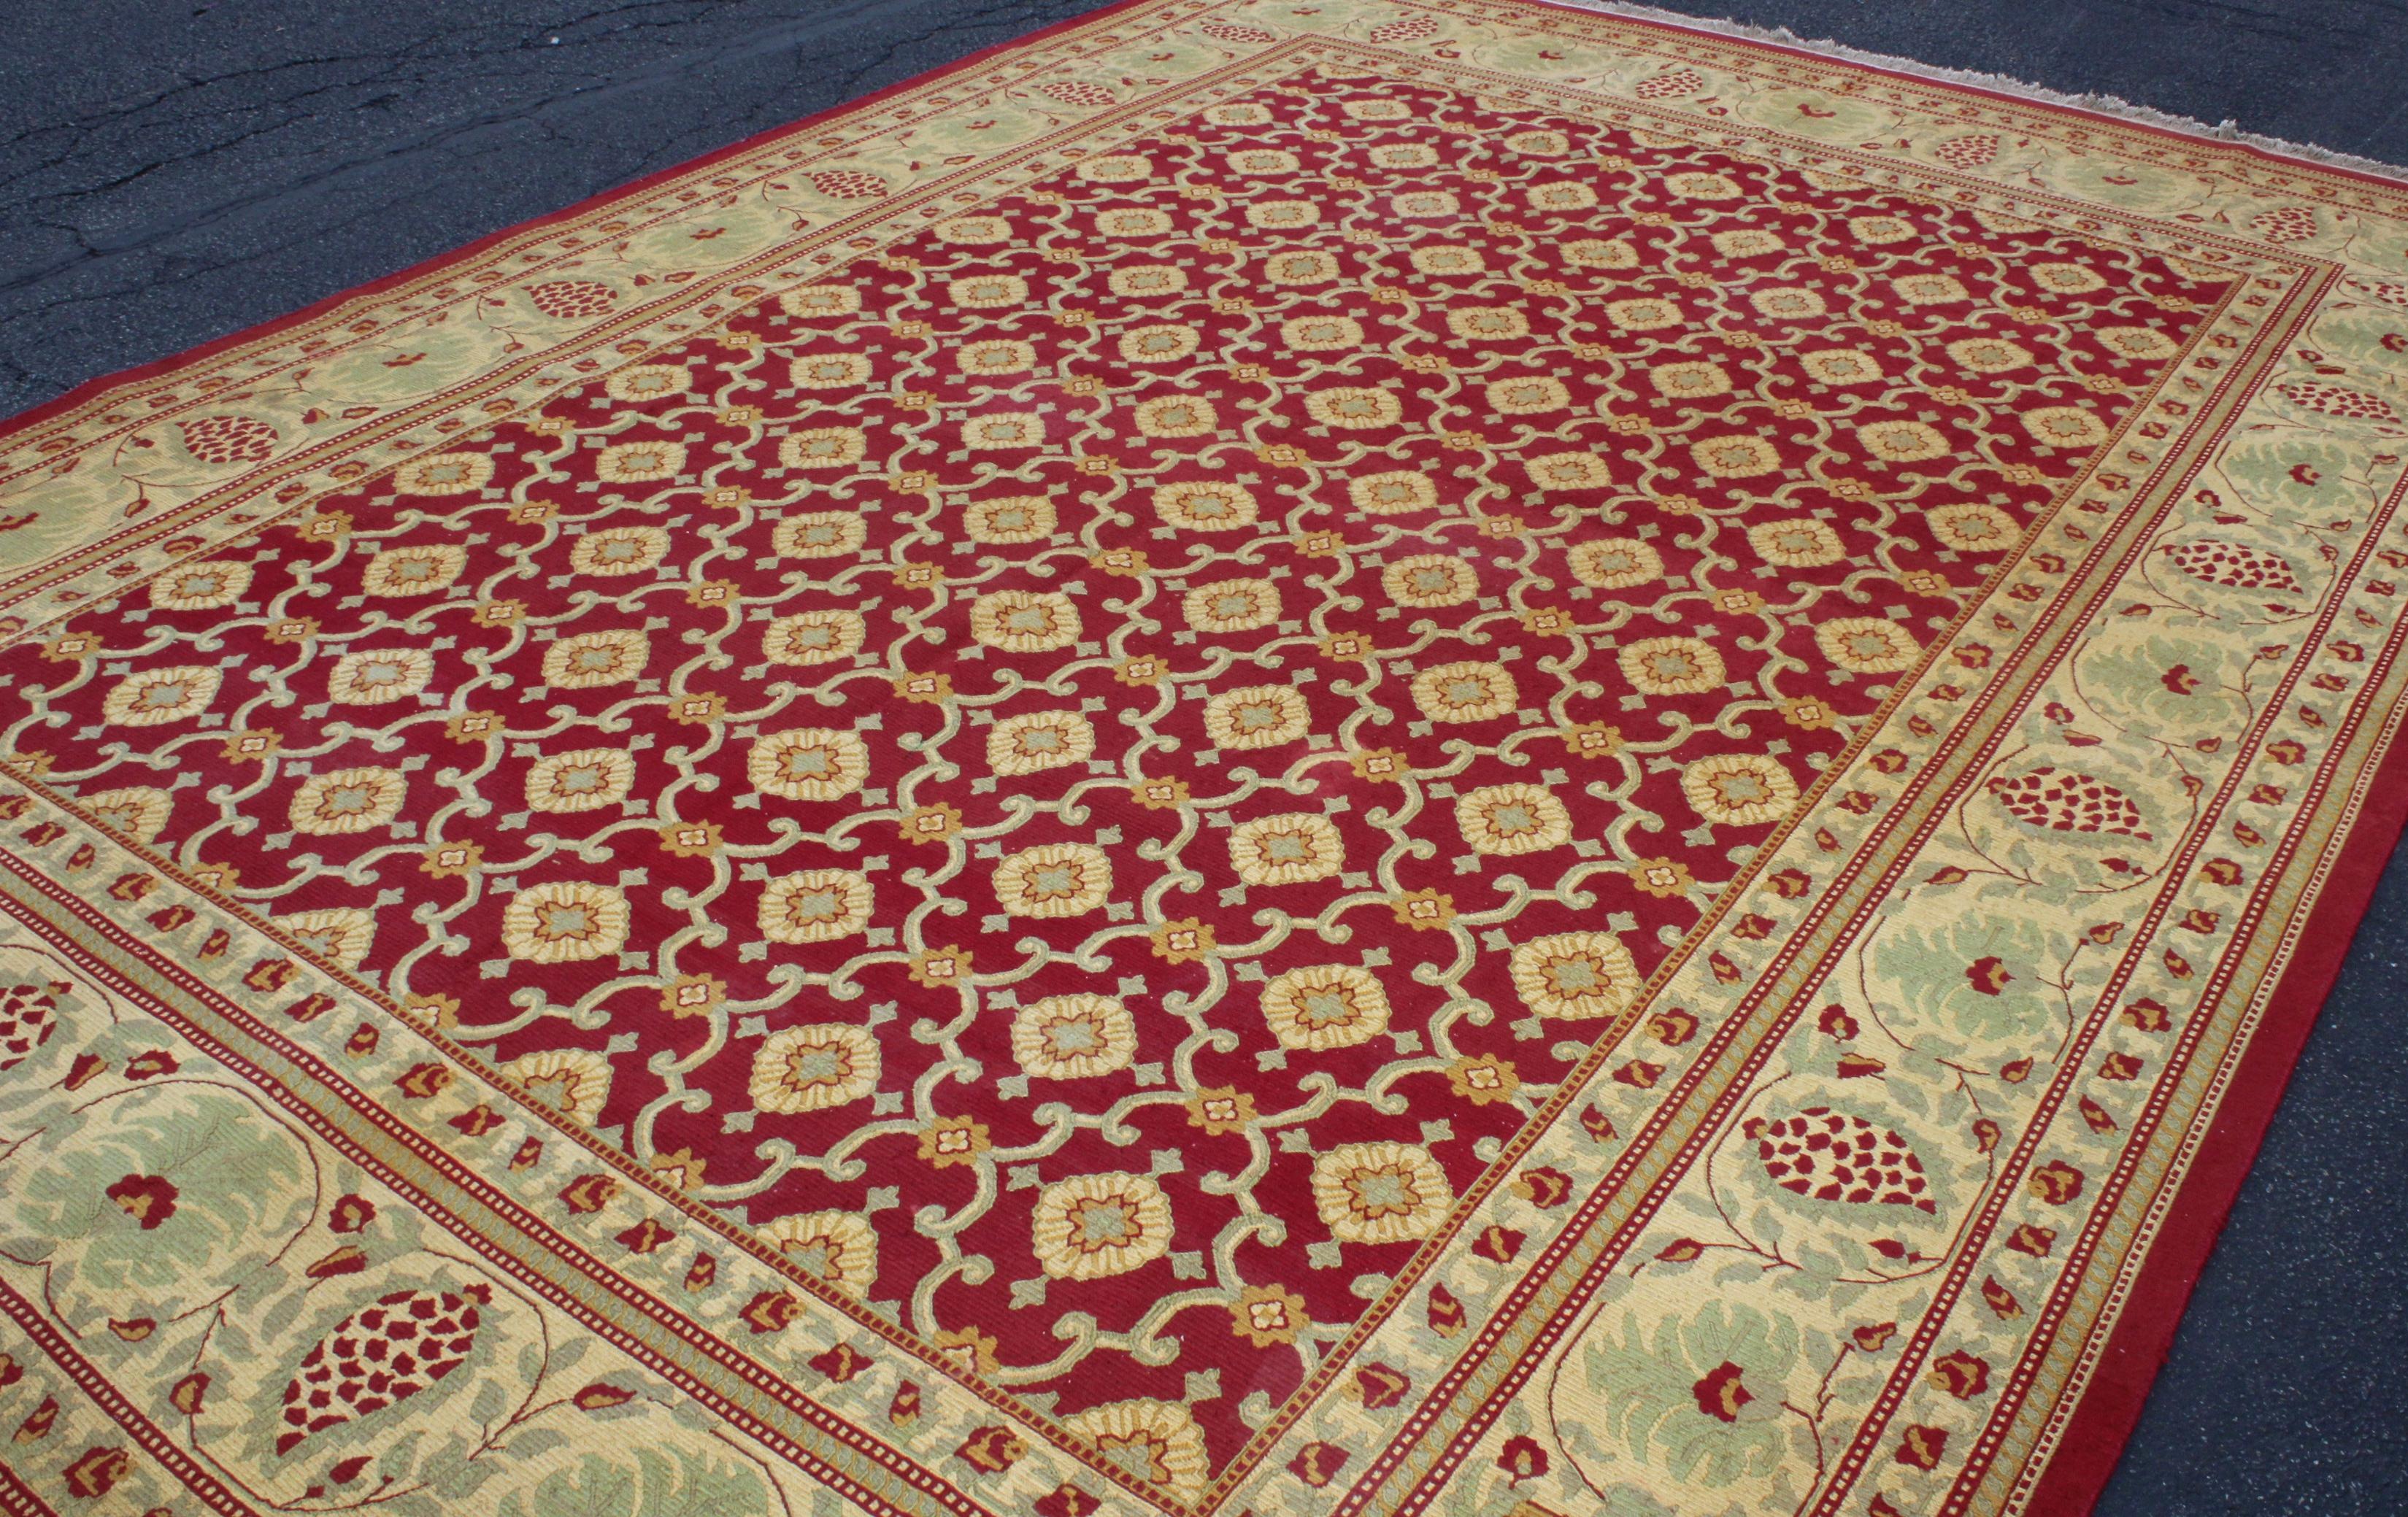 1940s Art Deco Oversize Rug from India 4